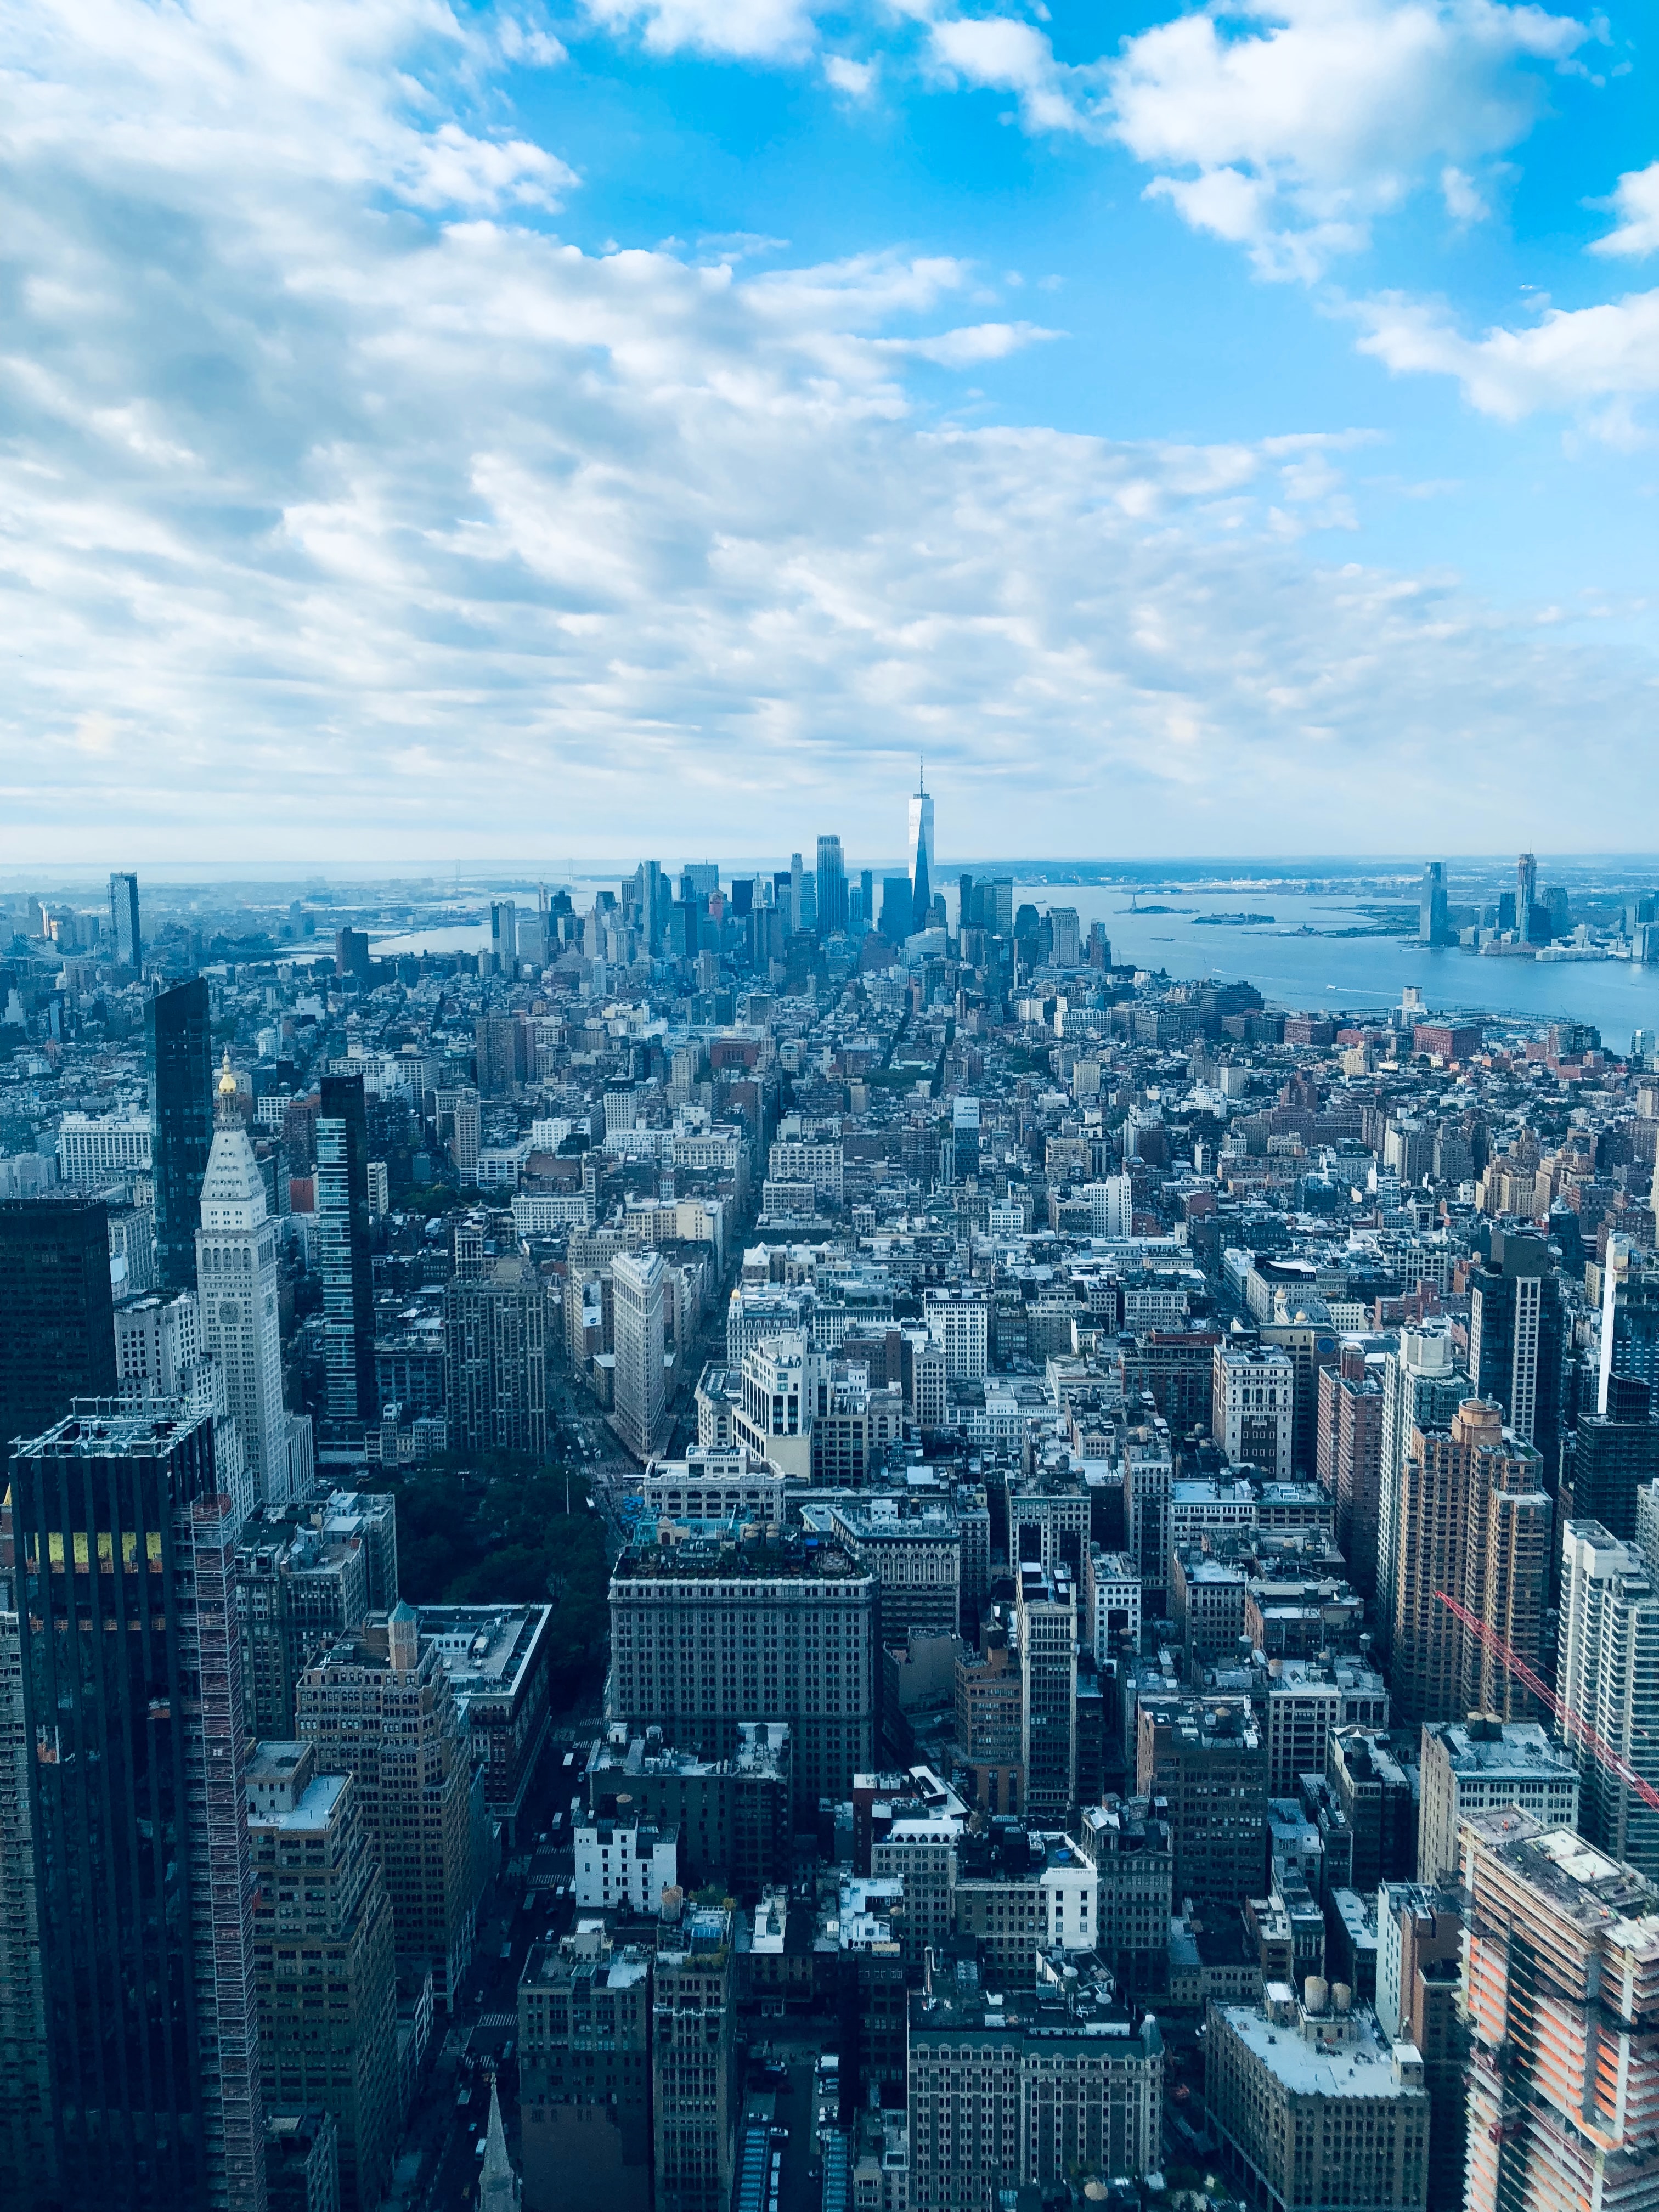 new york, cities, city, building, view from above, megapolis, megalopolis, urban landscape, cityscape